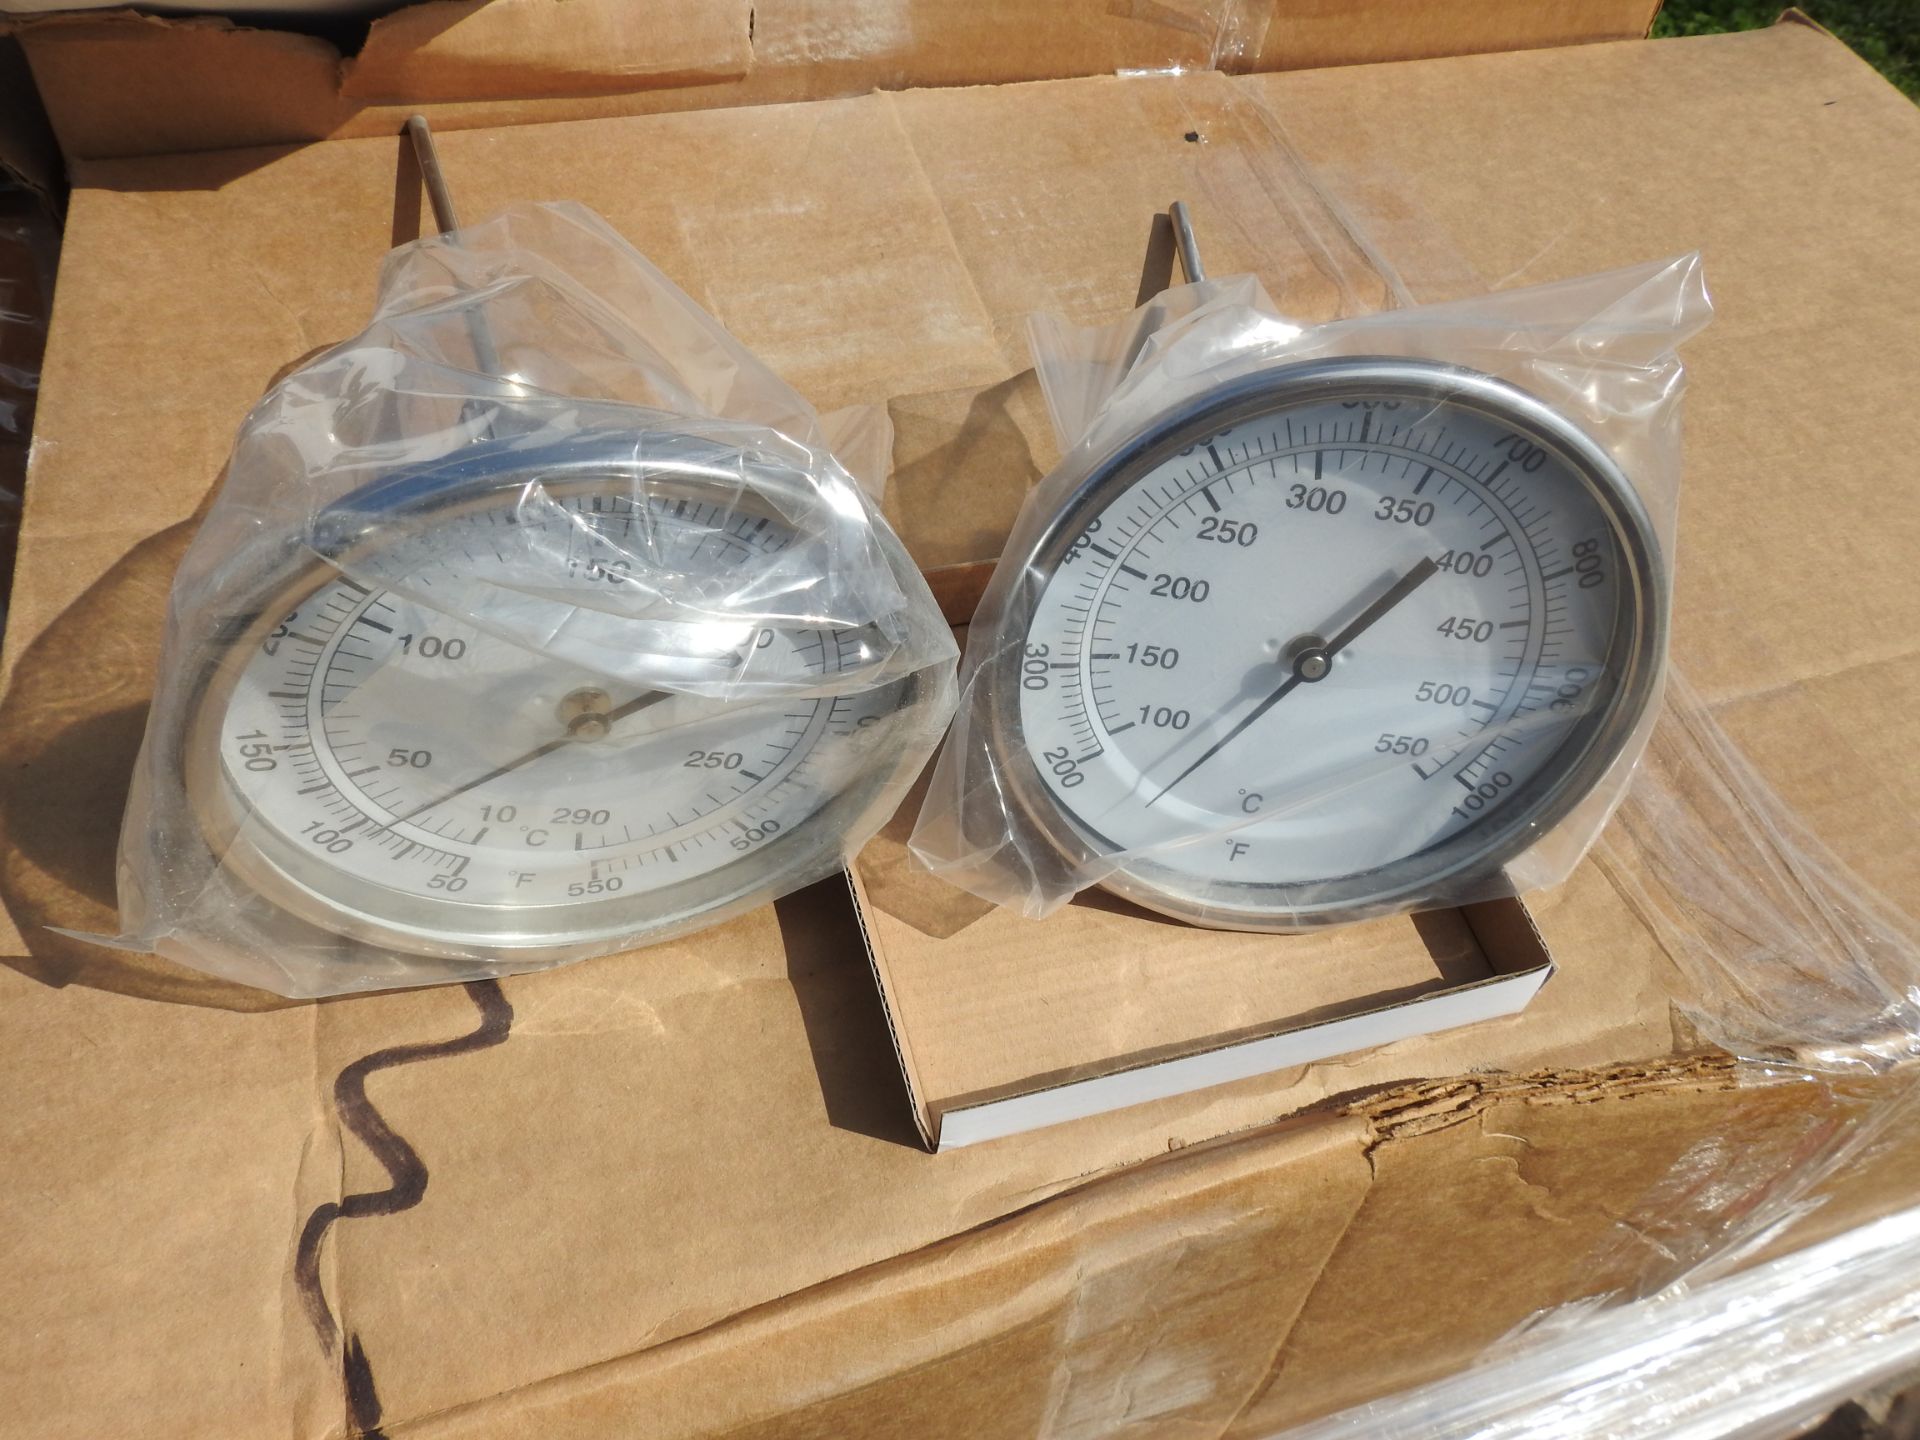 Lot of Assorted Parts, Temp Range Gauges, 50-550, 200-1000 ** Located: 4402 Theiss Rd, Houston, TX - Image 6 of 6